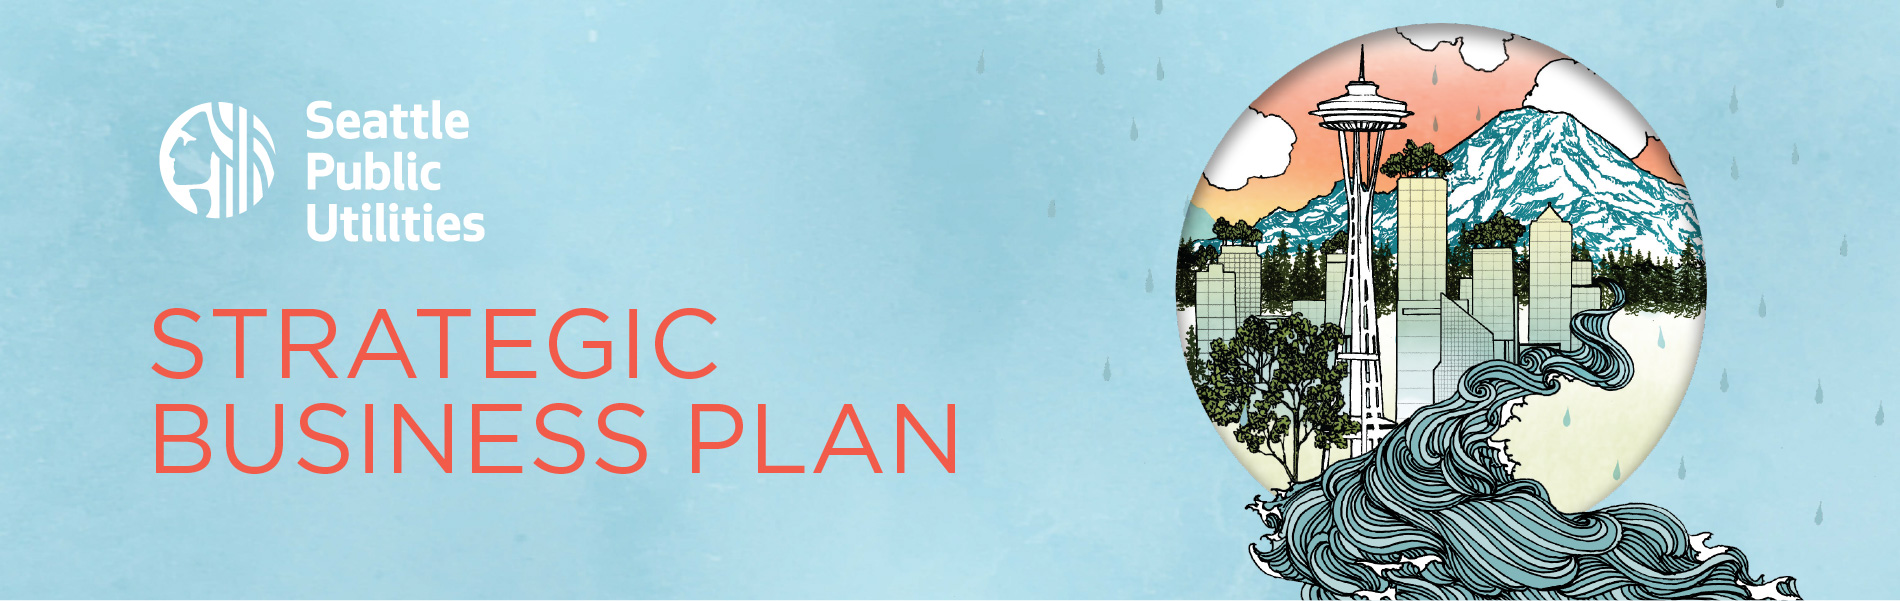 Strategic Business Plan cover